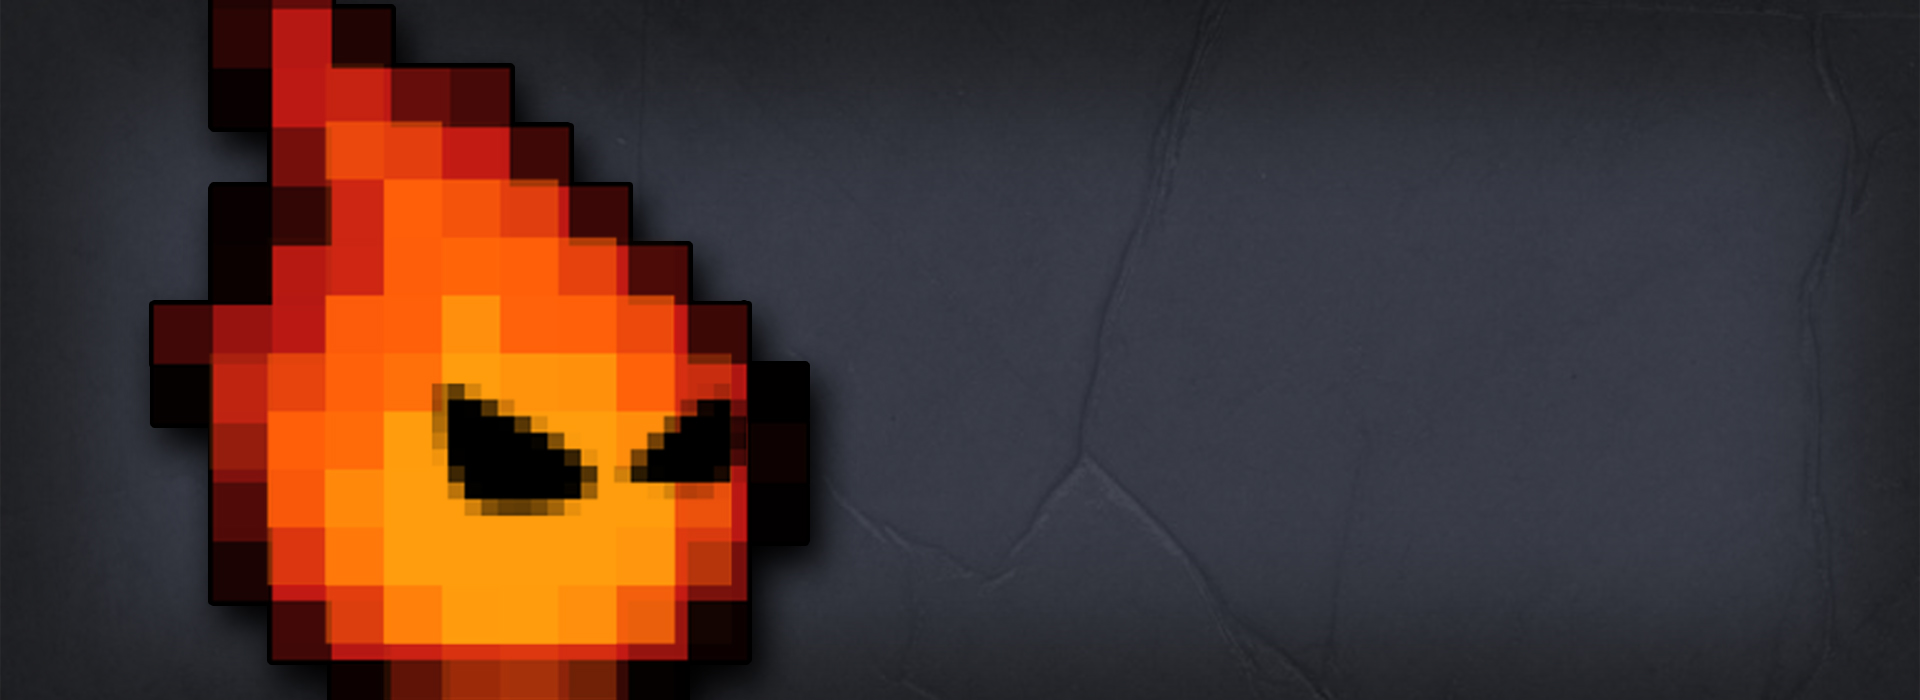   Watch Out for Fireballs!   A retro video games podcast.   Listen  